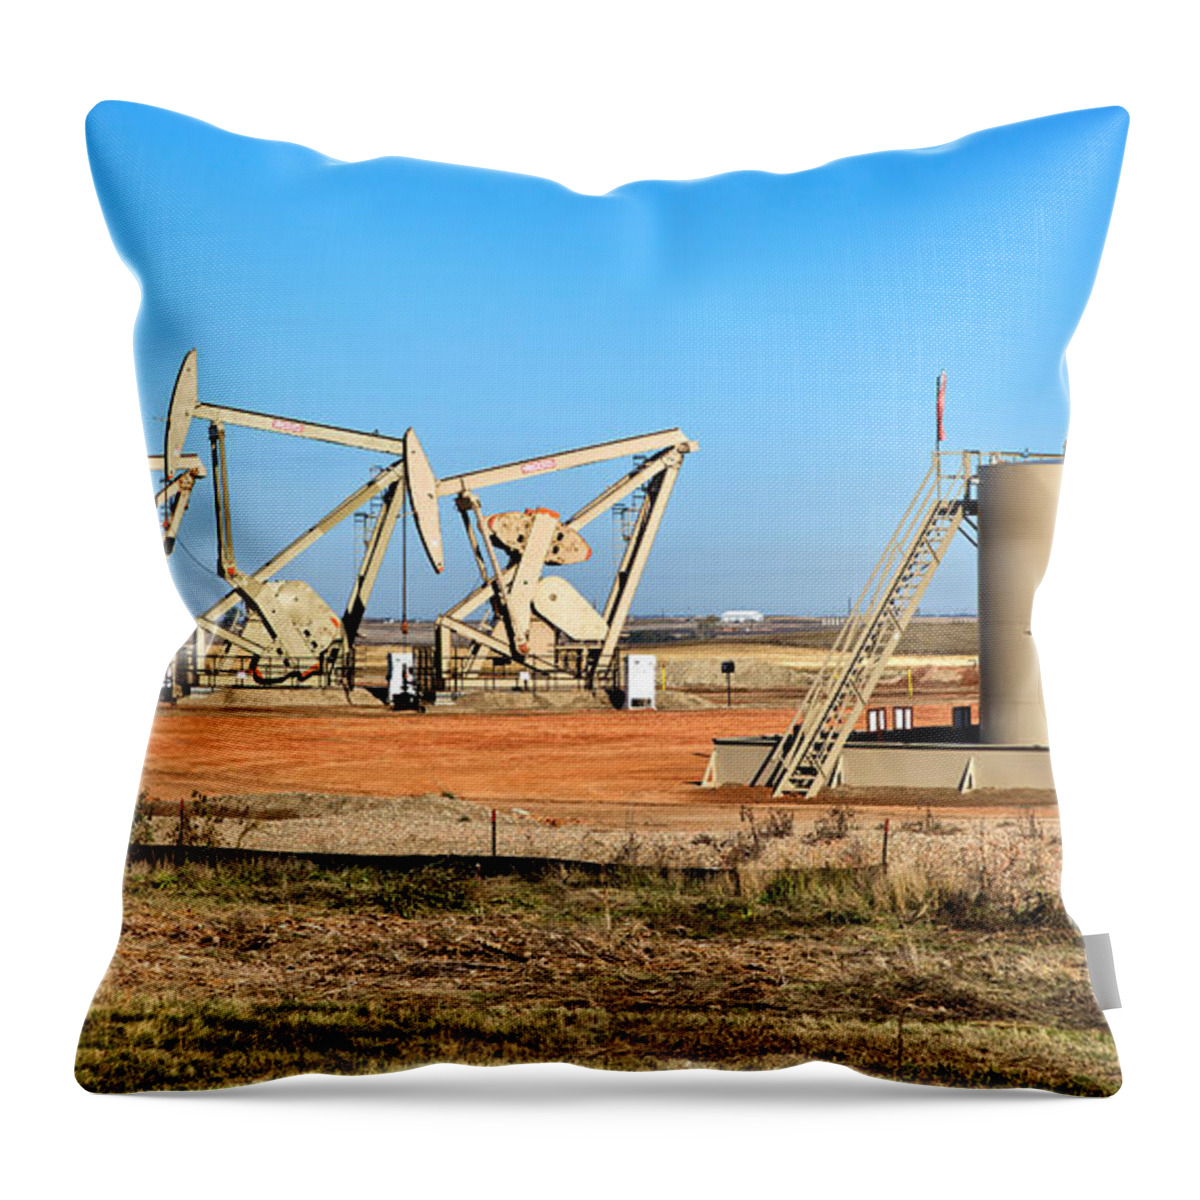 Nodding Donkey Throw Pillow featuring the photograph Oil Well Pumps And Storage Tanks by Inga Spence